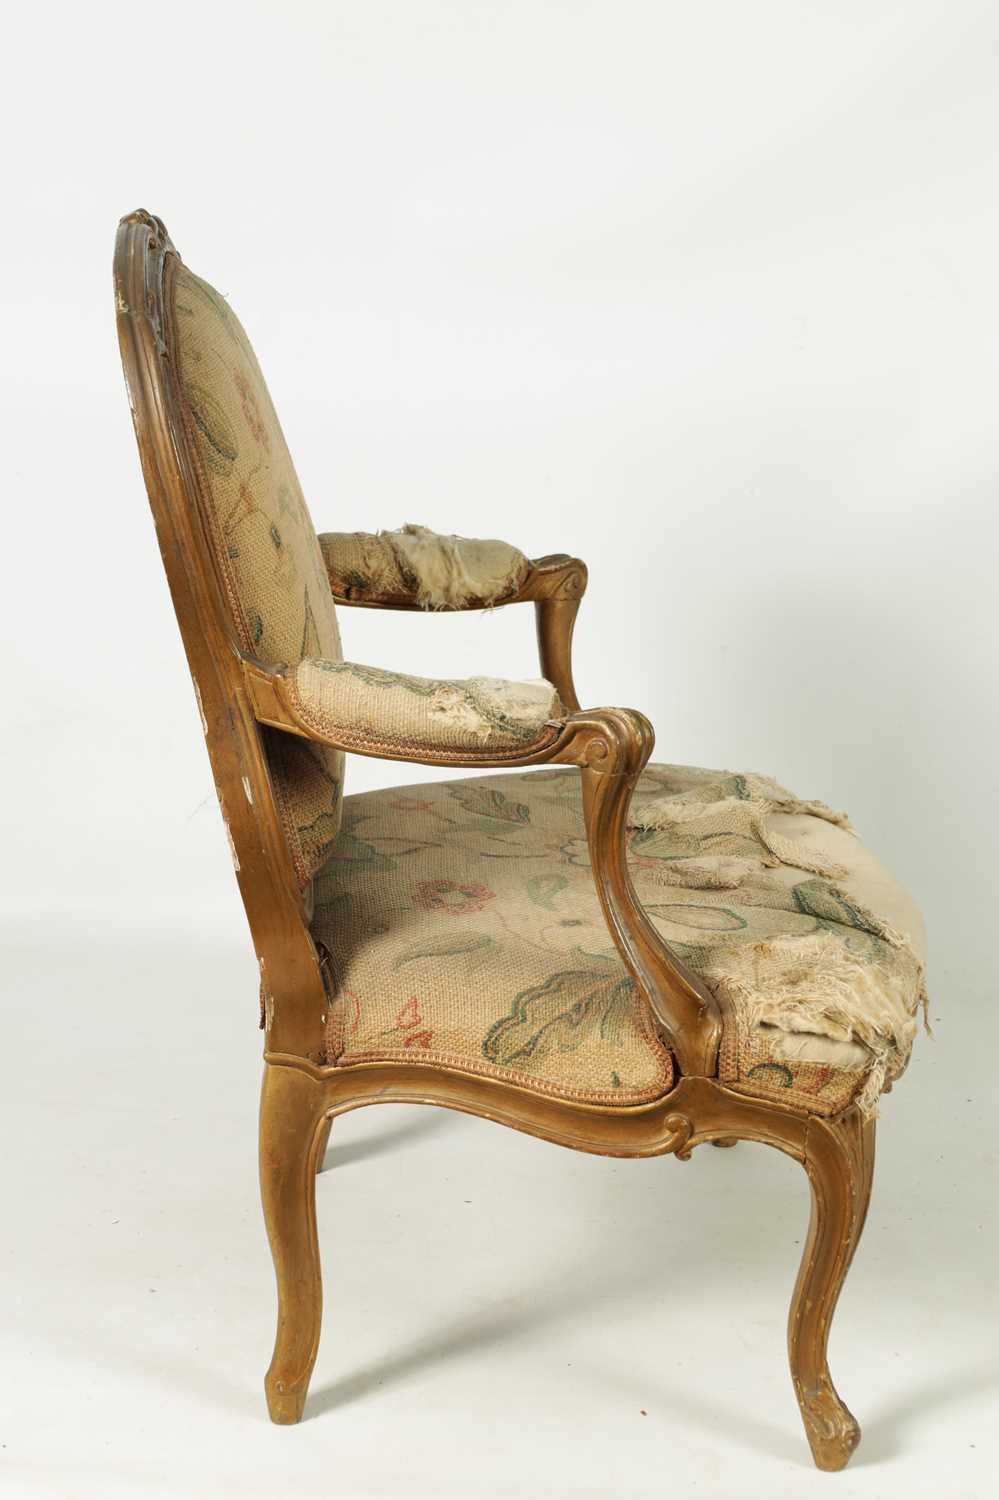 JEAN BAPTISTE TILLIARD AN 18TH CENTURY FRENCH CARVED GILT WOOD UPHOLSTERED OPEN ARMCHAIR - Image 8 of 13